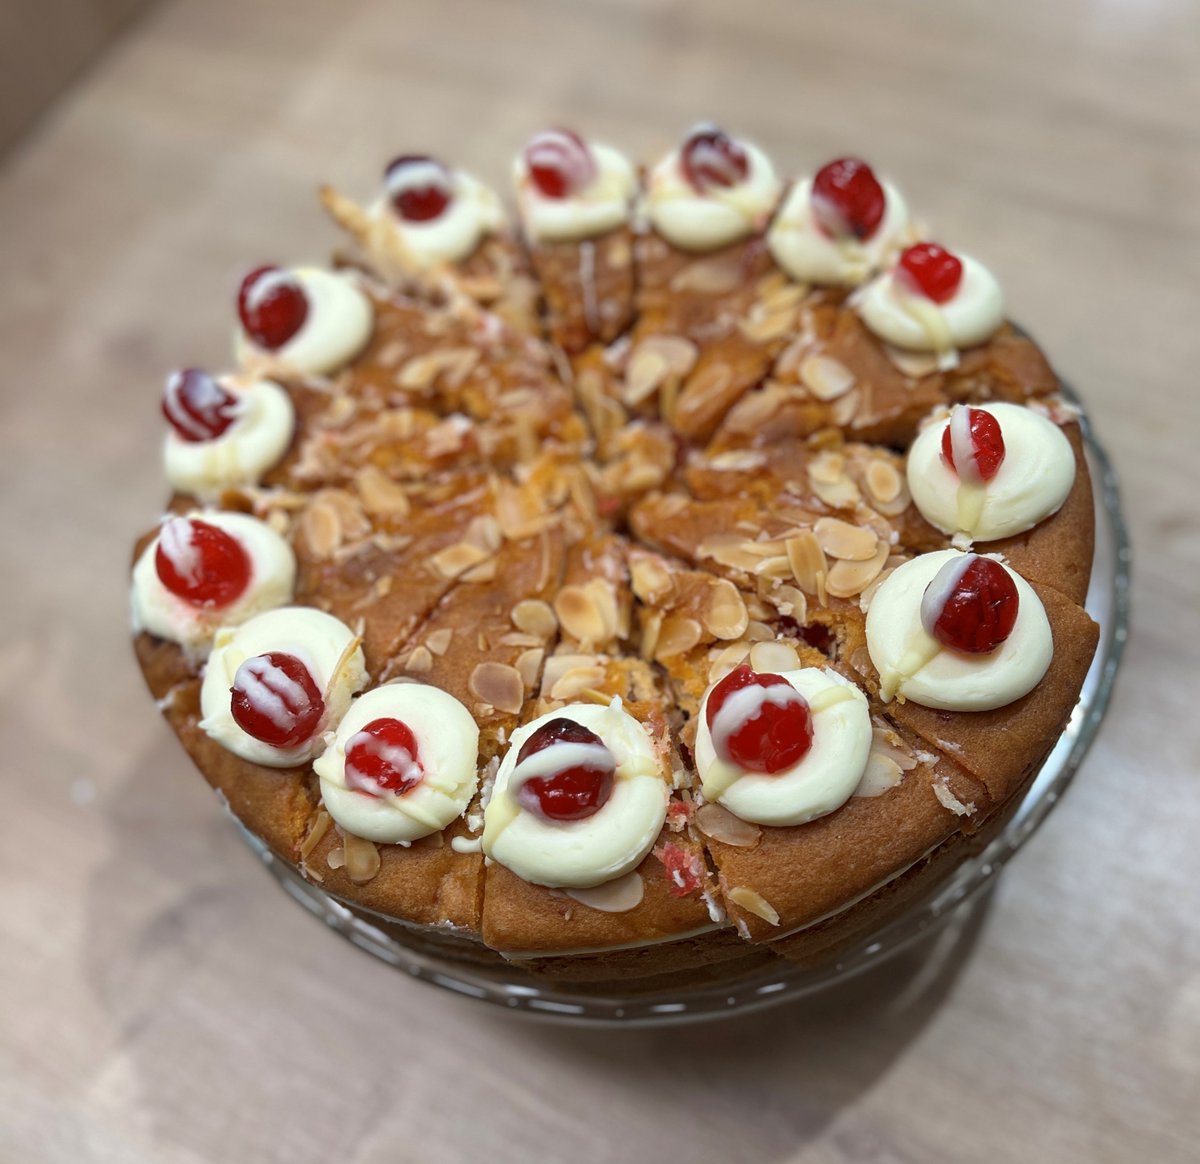 How amazing does this Cherry Bakewell cake look? 😍 Come down to our coffee shop and enjoy a slice......but be quick it won't be around for long🍰 Open 10am-2.30pm Mon-Sat ☕